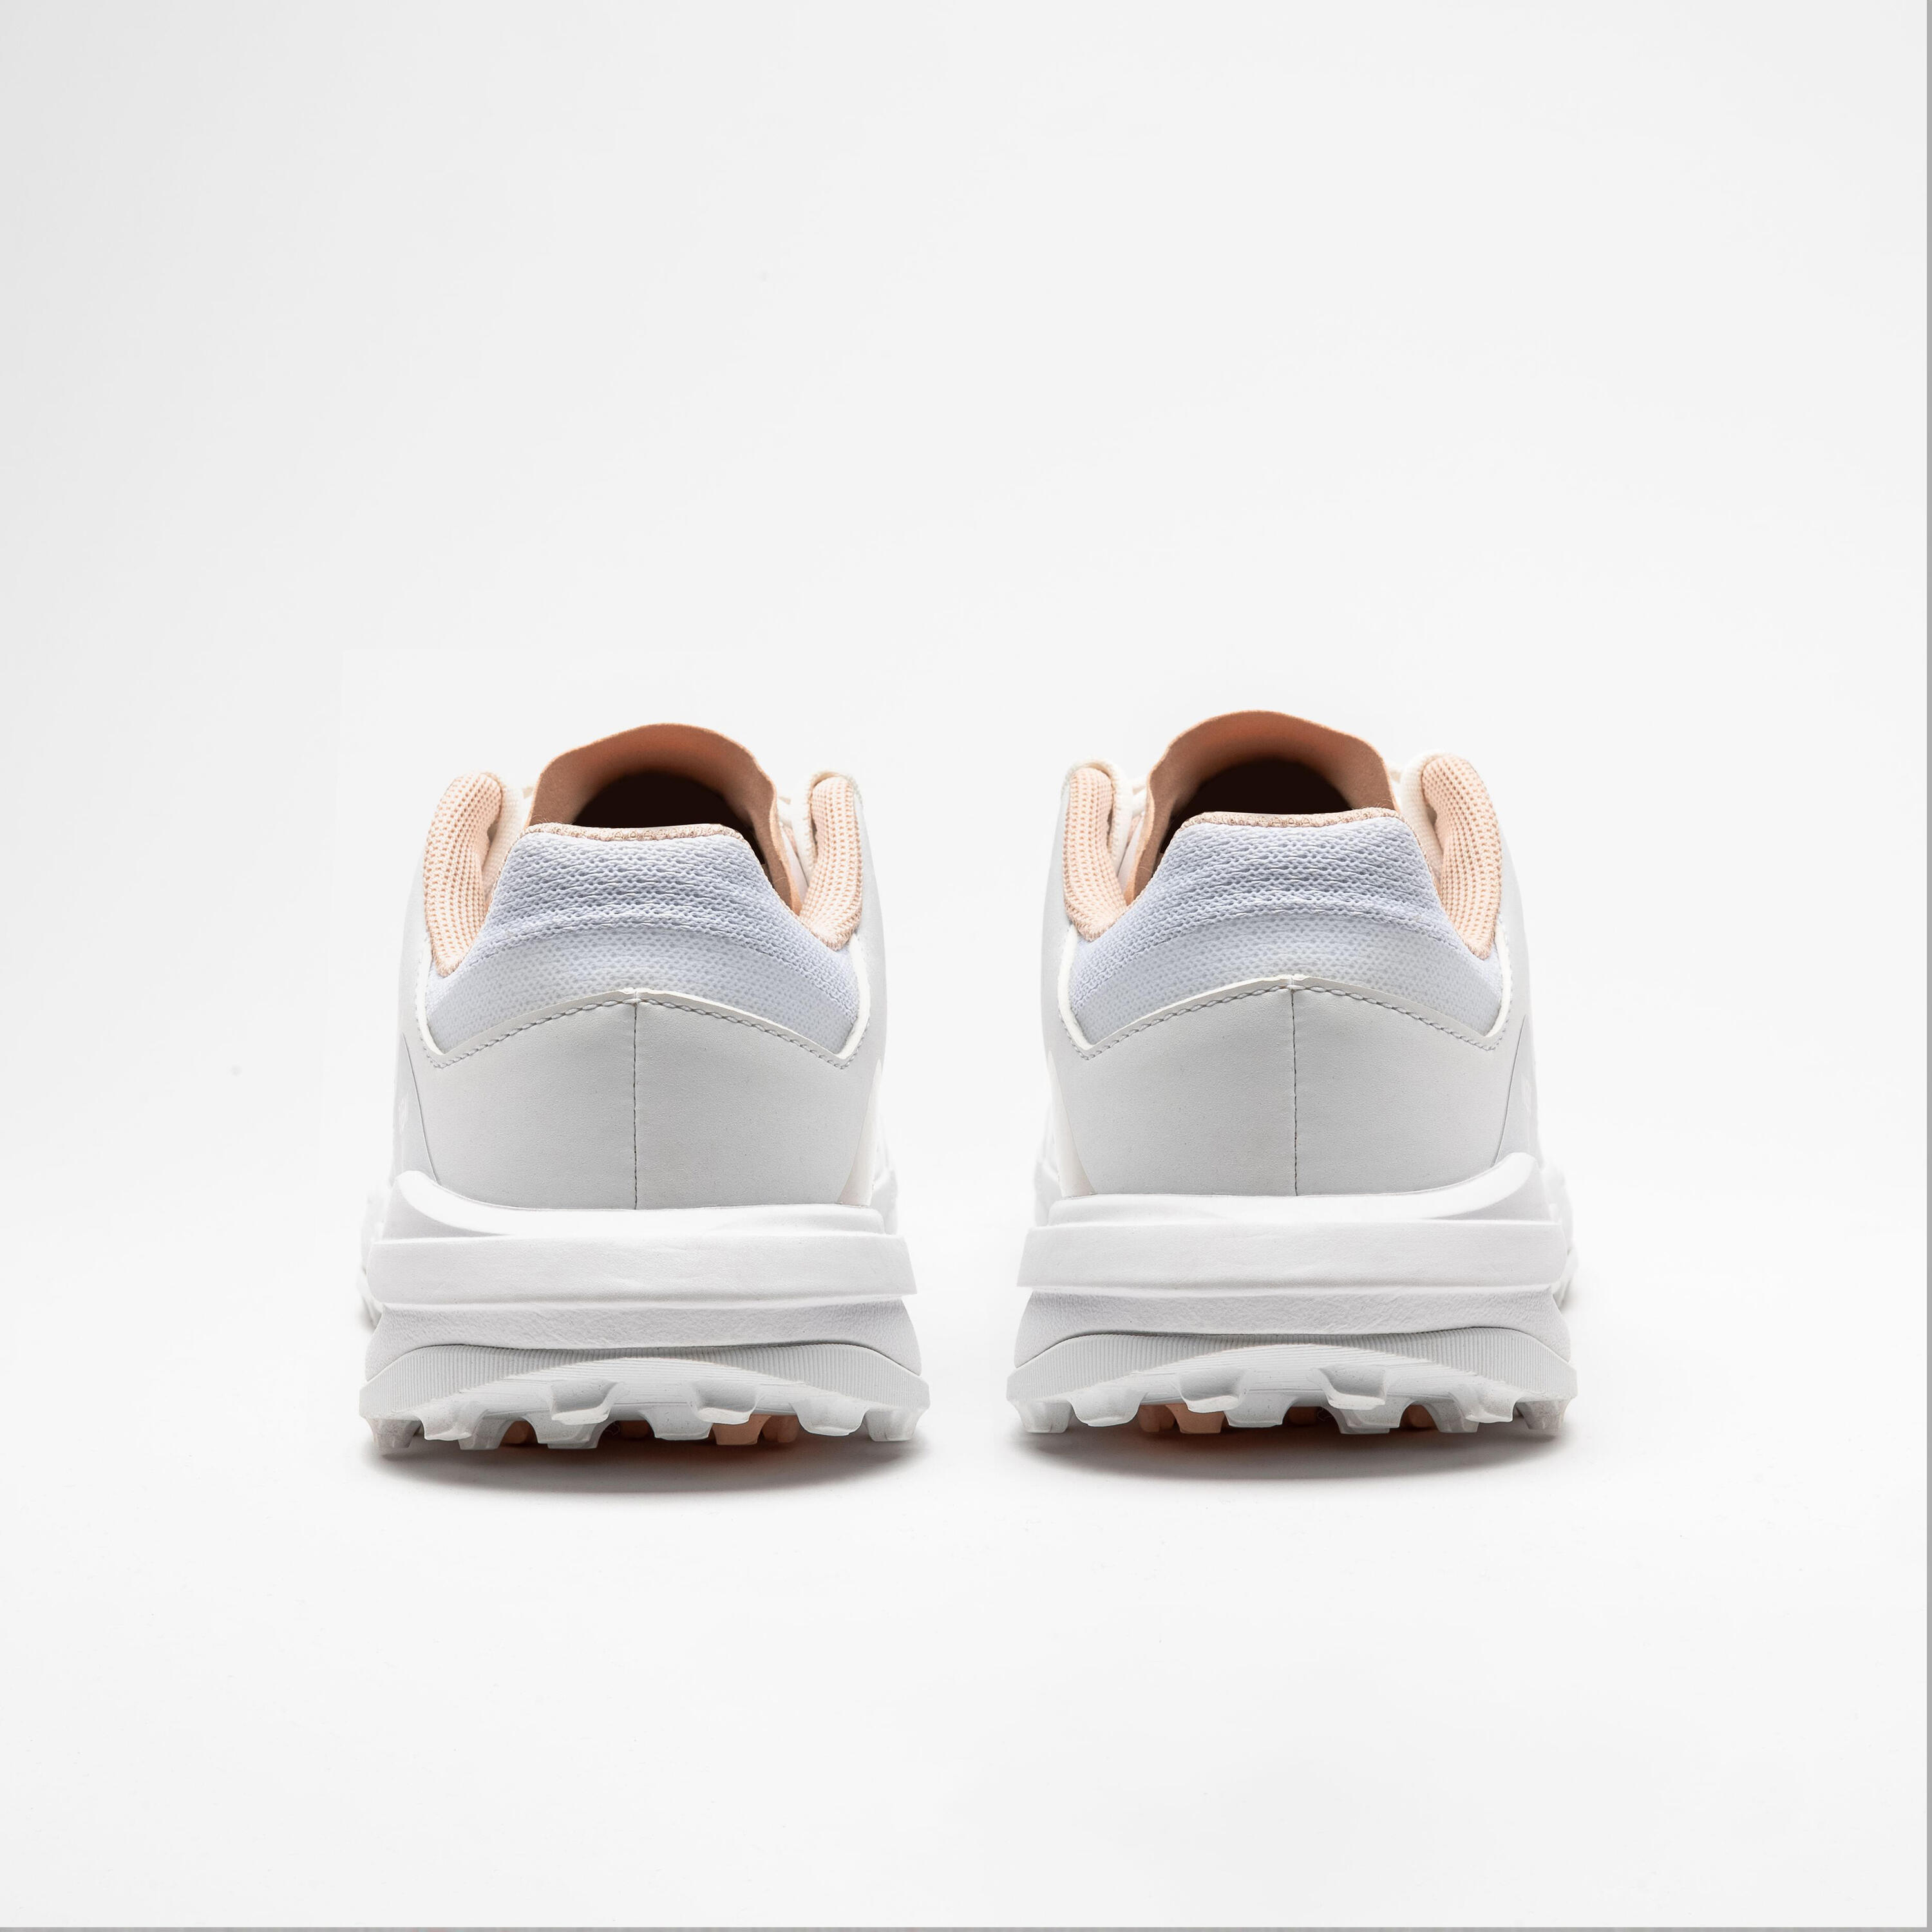 Women's Breathable Golf Shoes - WW 500 White & Pink/Beige 4/6